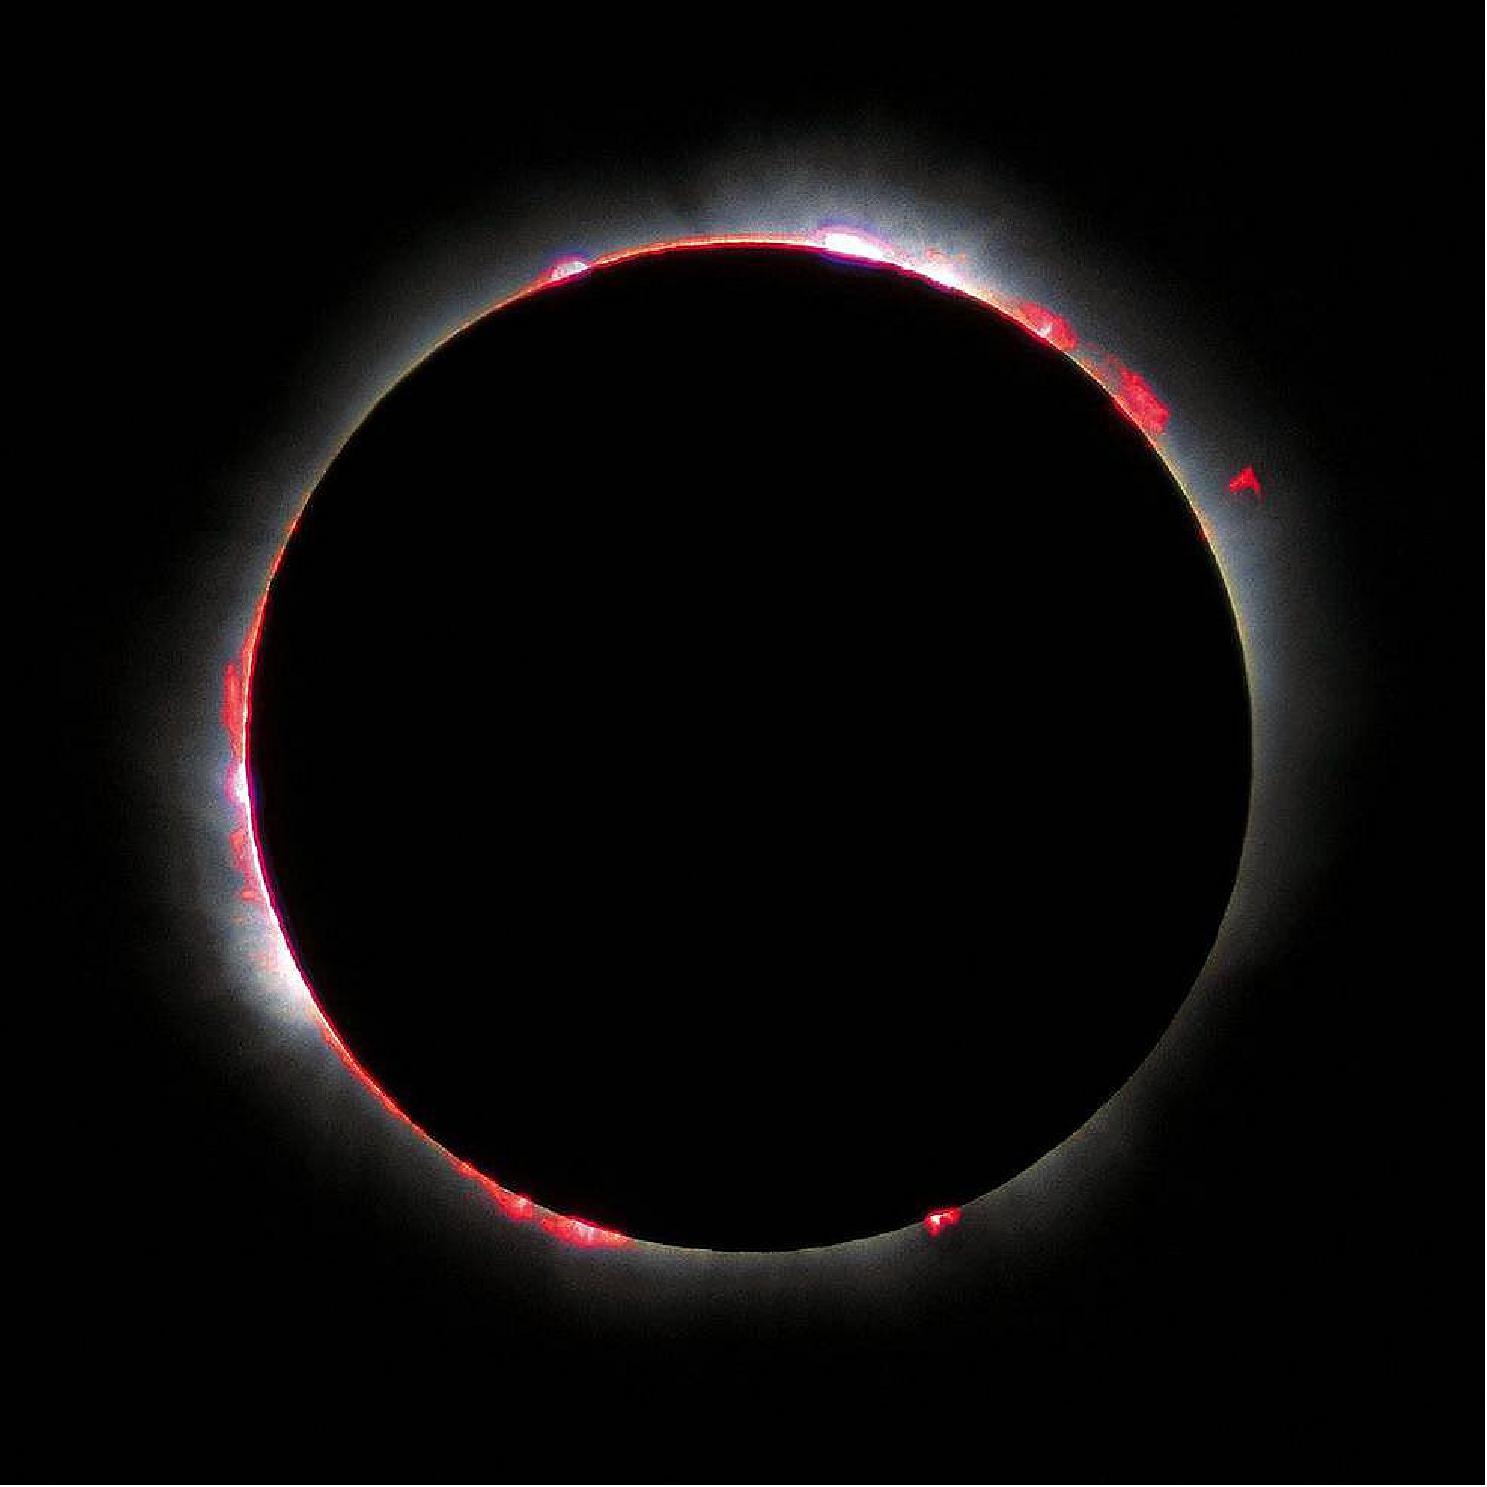 Figure 7: The chromosphere, photographed during the 1999 total solar eclipse. The red and pink hues – light emitted by hydrogen – earned it the name chromosphere, from the Greek “chrôma” meaning color (image credit: Luc Viatour)